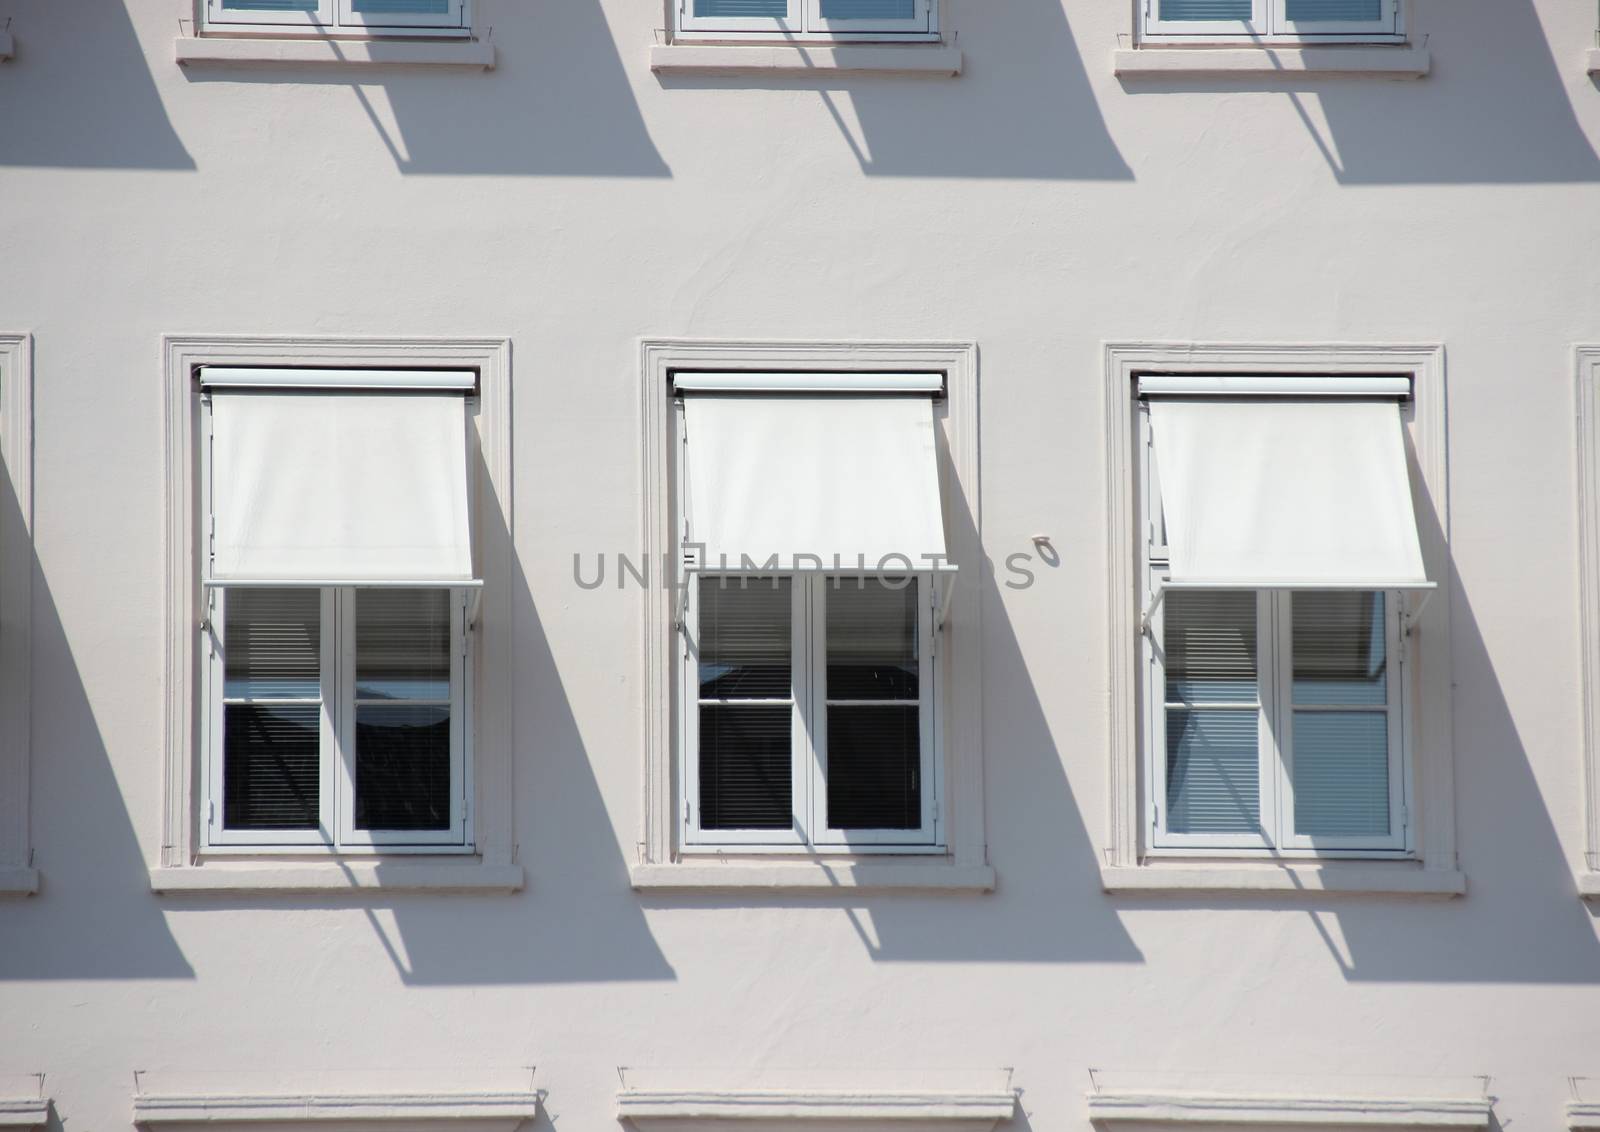 Three windows on grey building with  white awnings and shadow